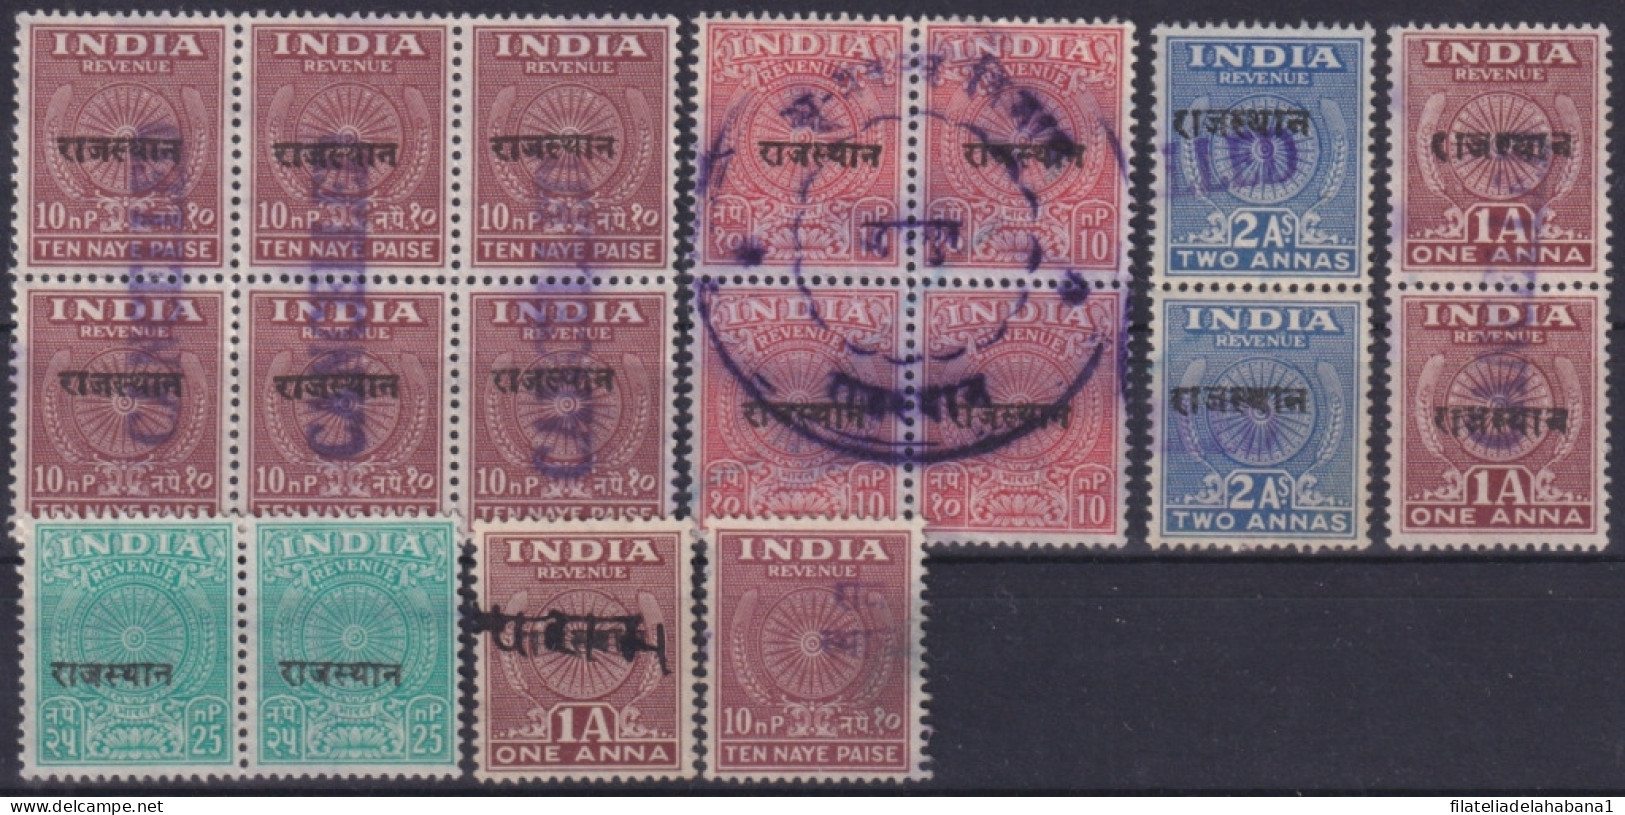 F-EX49725 INDIA LOCAL REVENUE TAX. RAJASTHAN OVERPRINT.  - Official Stamps